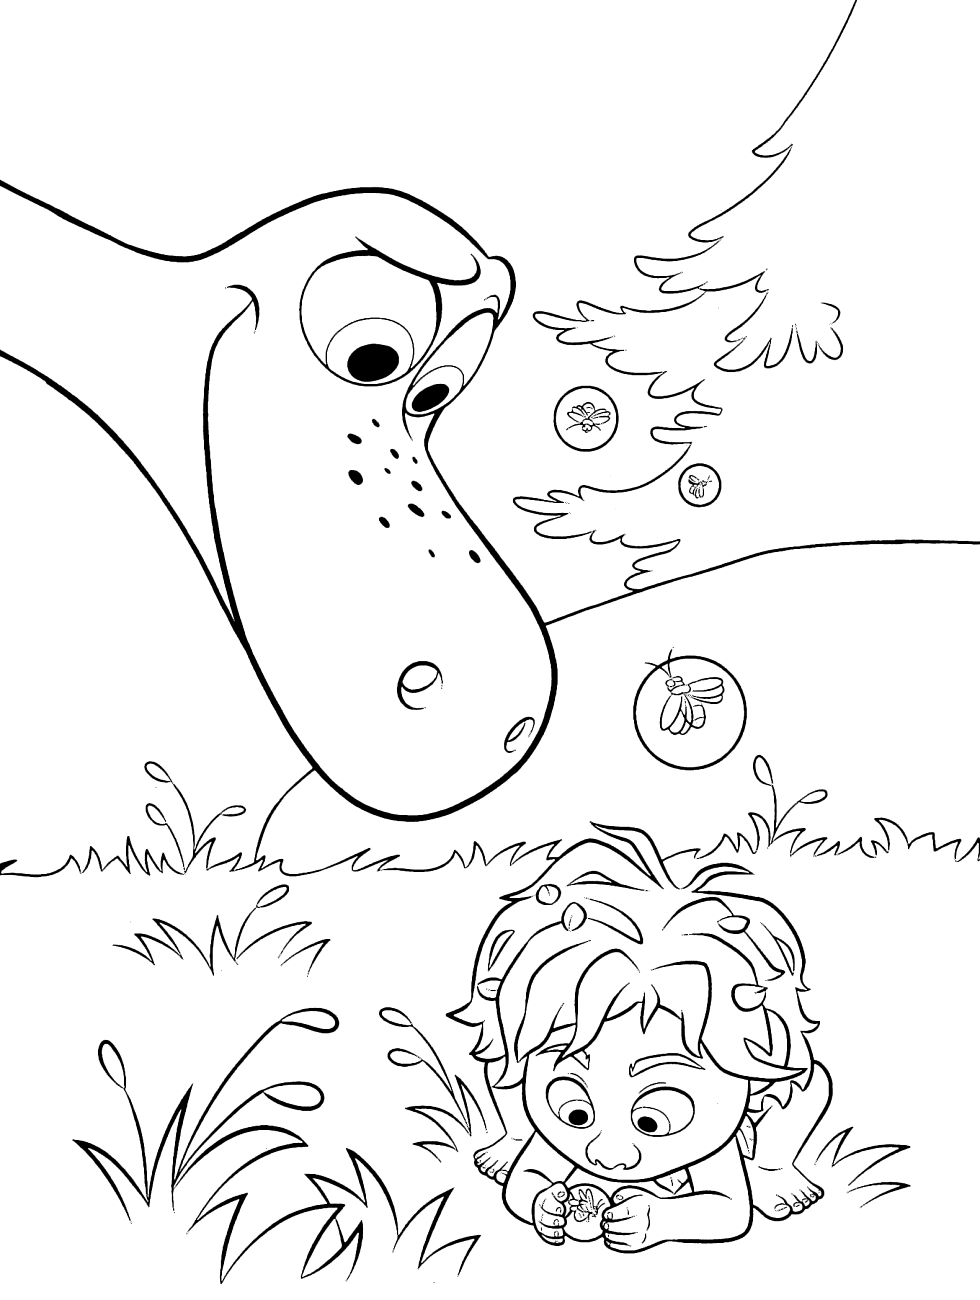 Arlo with Spotlooking the fireflies Coloring Page